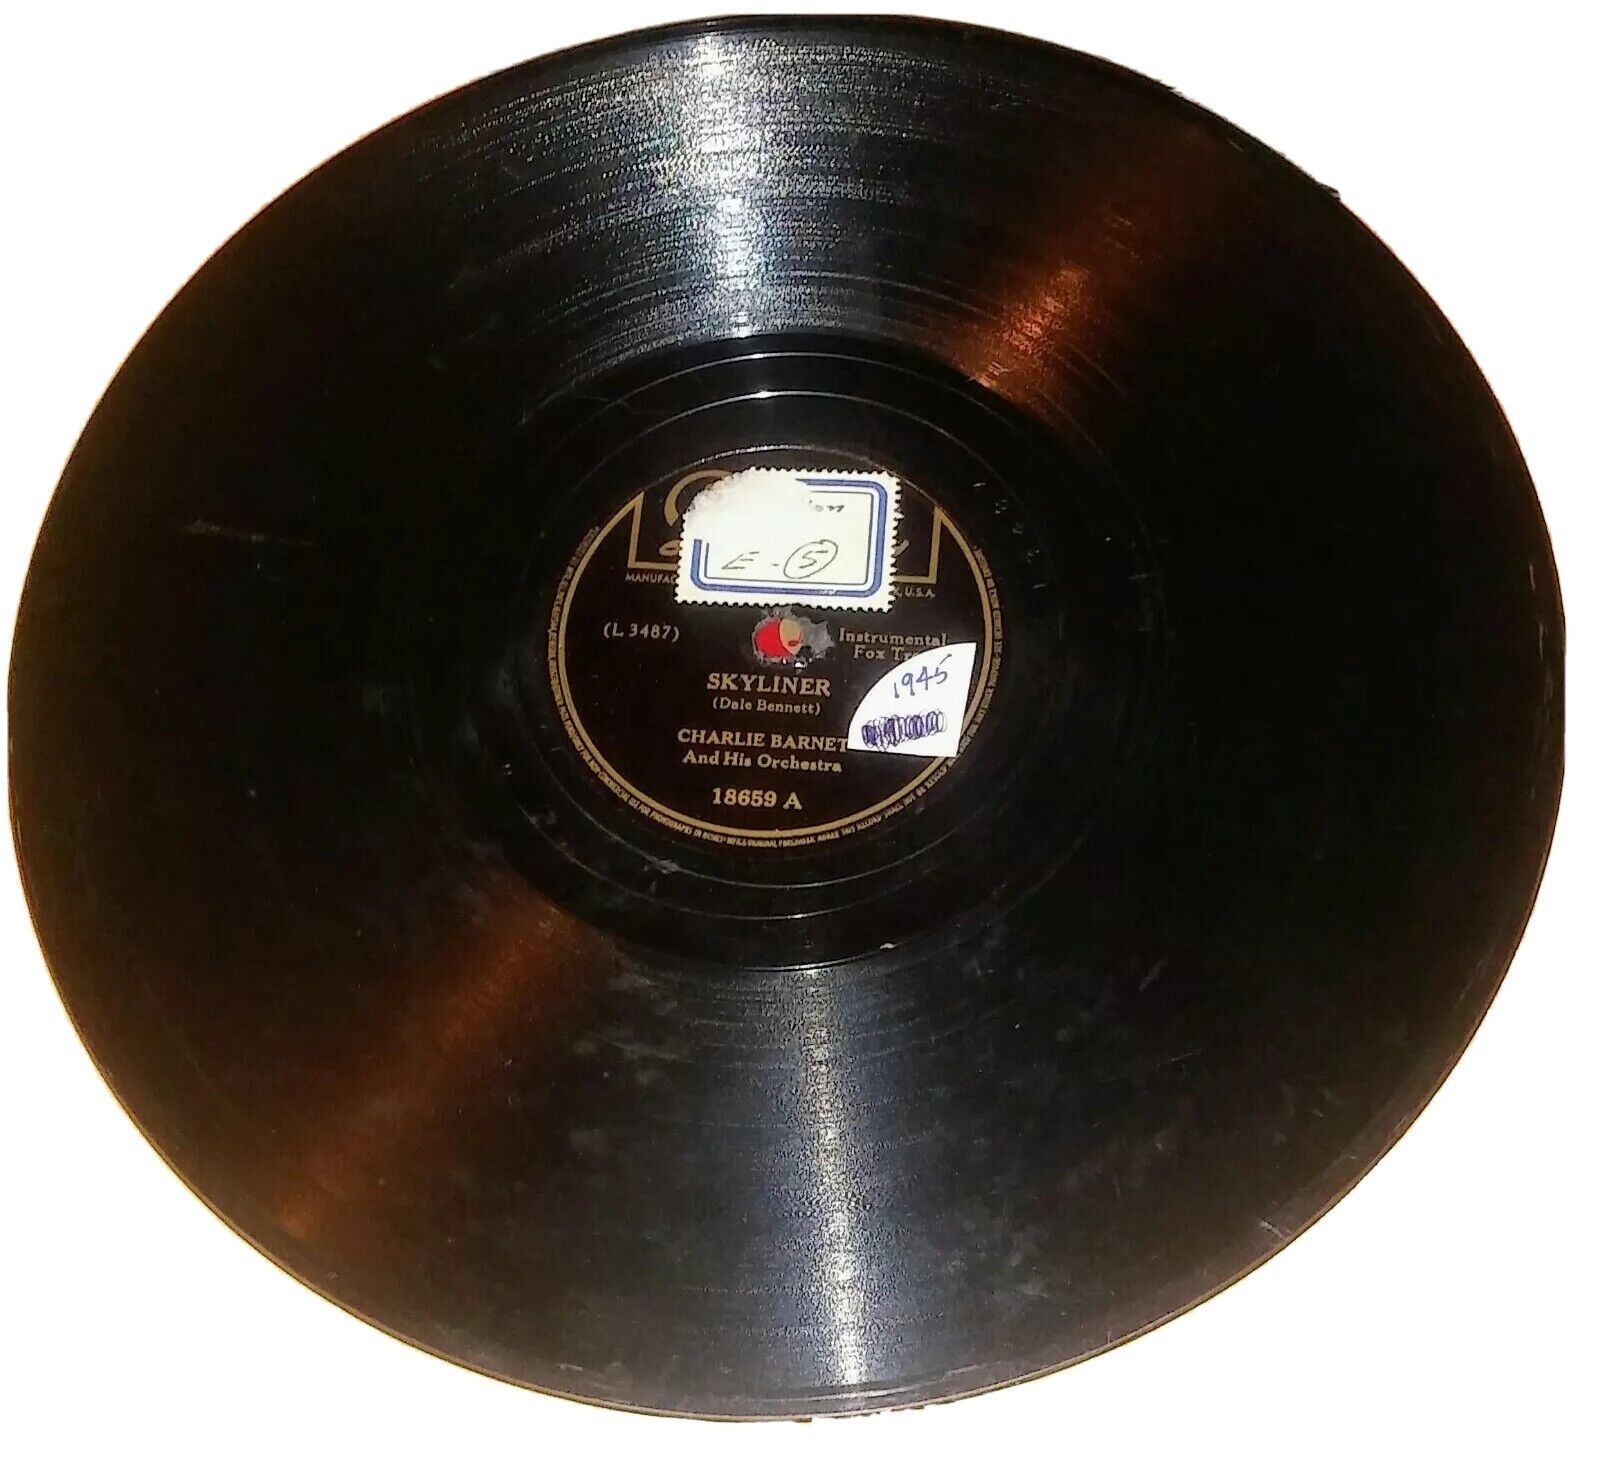 Skyliner By Charlie Barnet And His Orchestra 78 RPM Record.  Decca 18659 1945